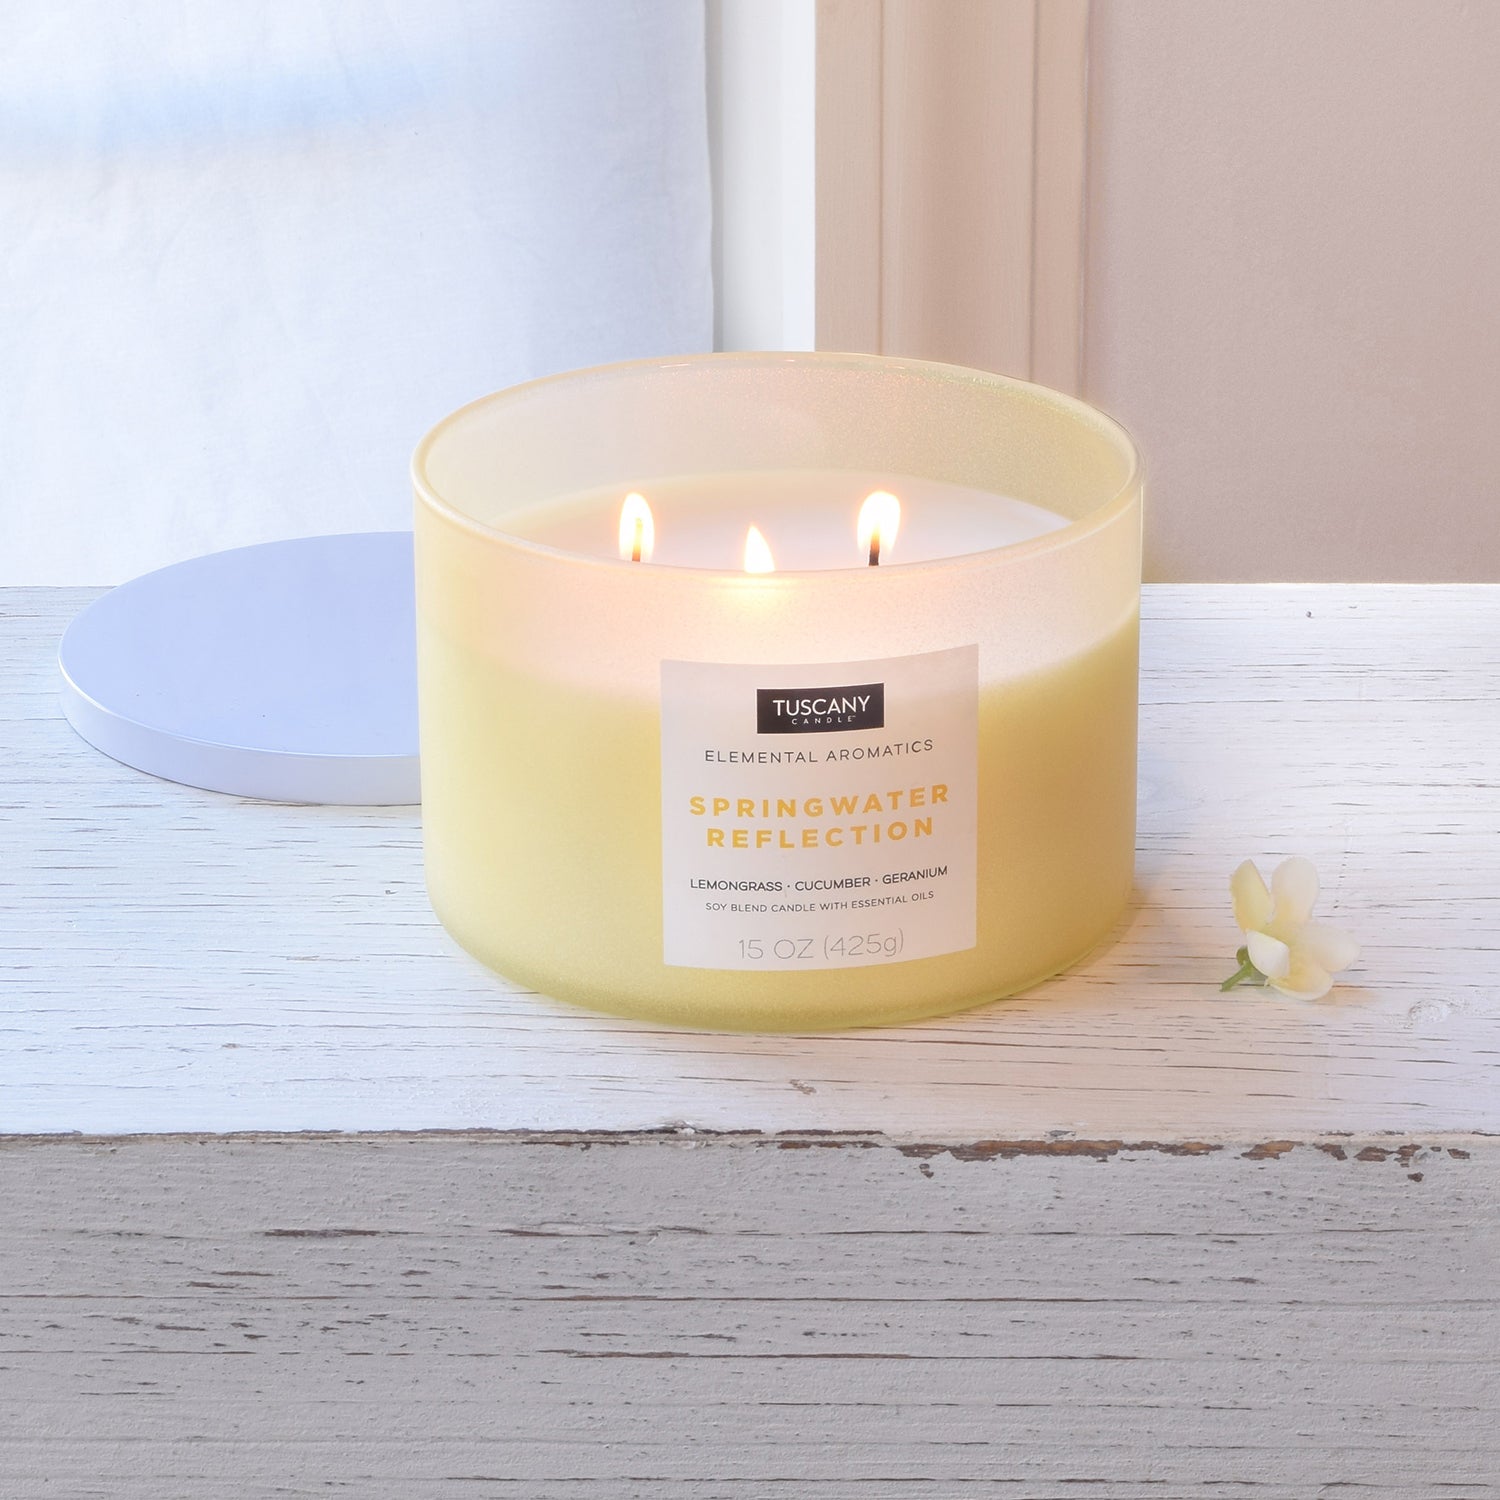 A Tuscany Candle Springwater Reflection Scented Jar Candle (15 oz) – Elemental Aromatics Collection sits on a table next to a window.